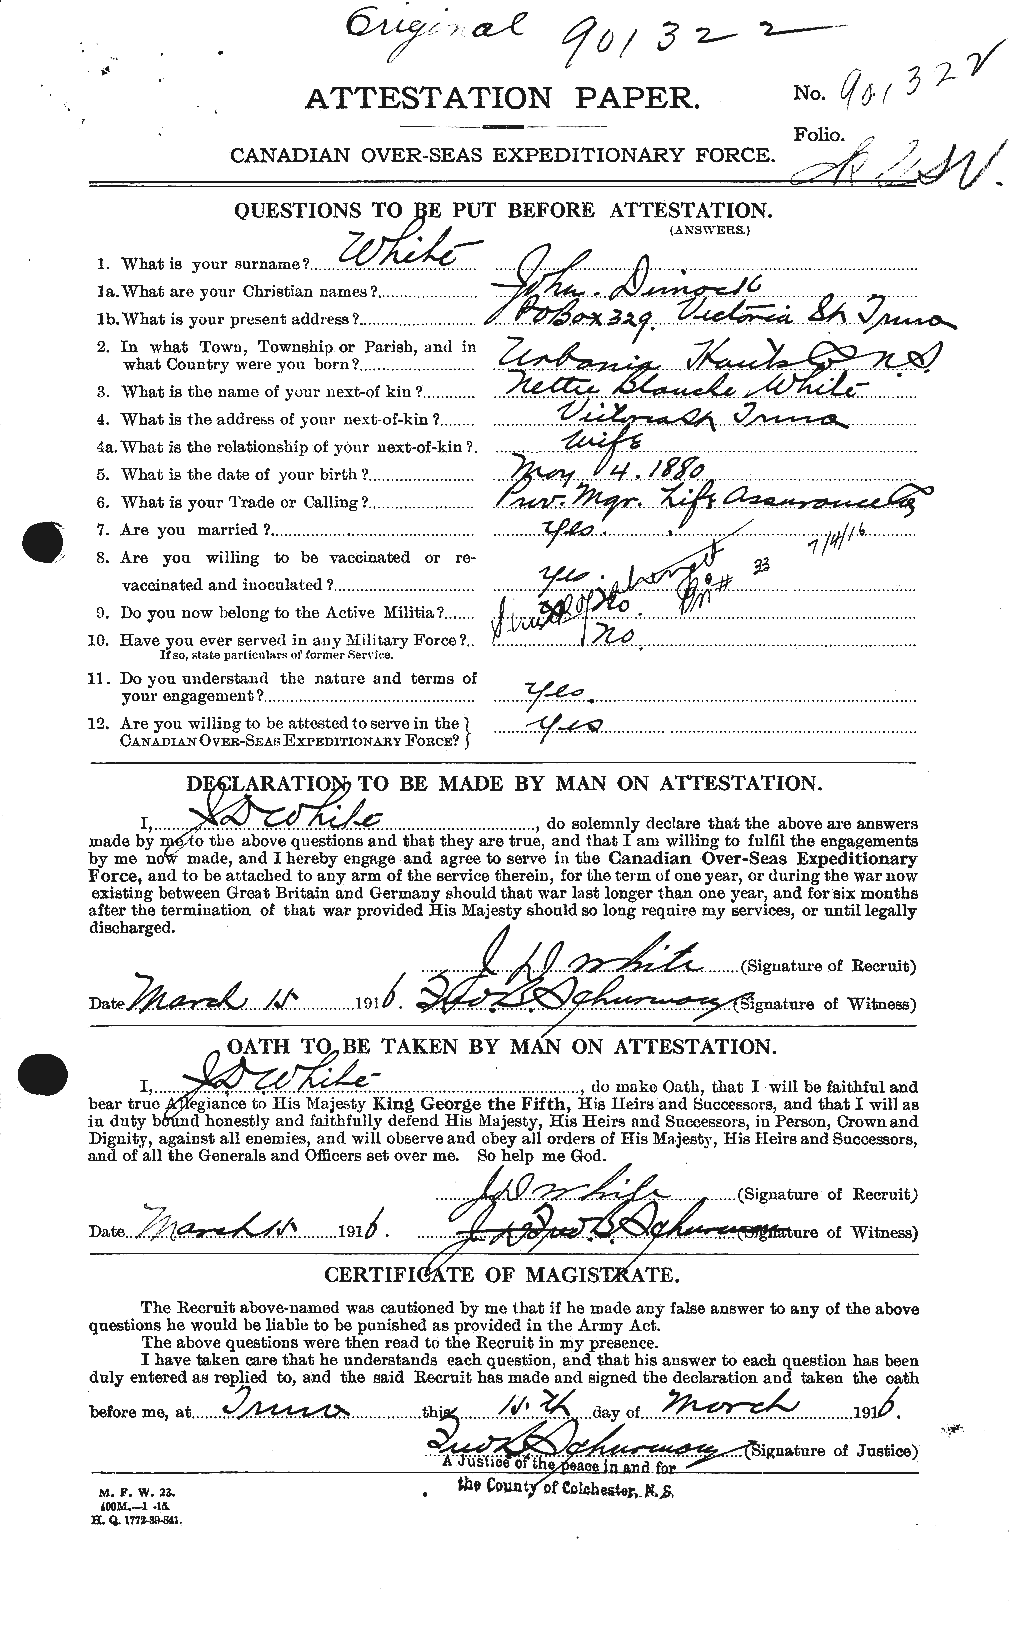 Personnel Records of the First World War - CEF 671551a